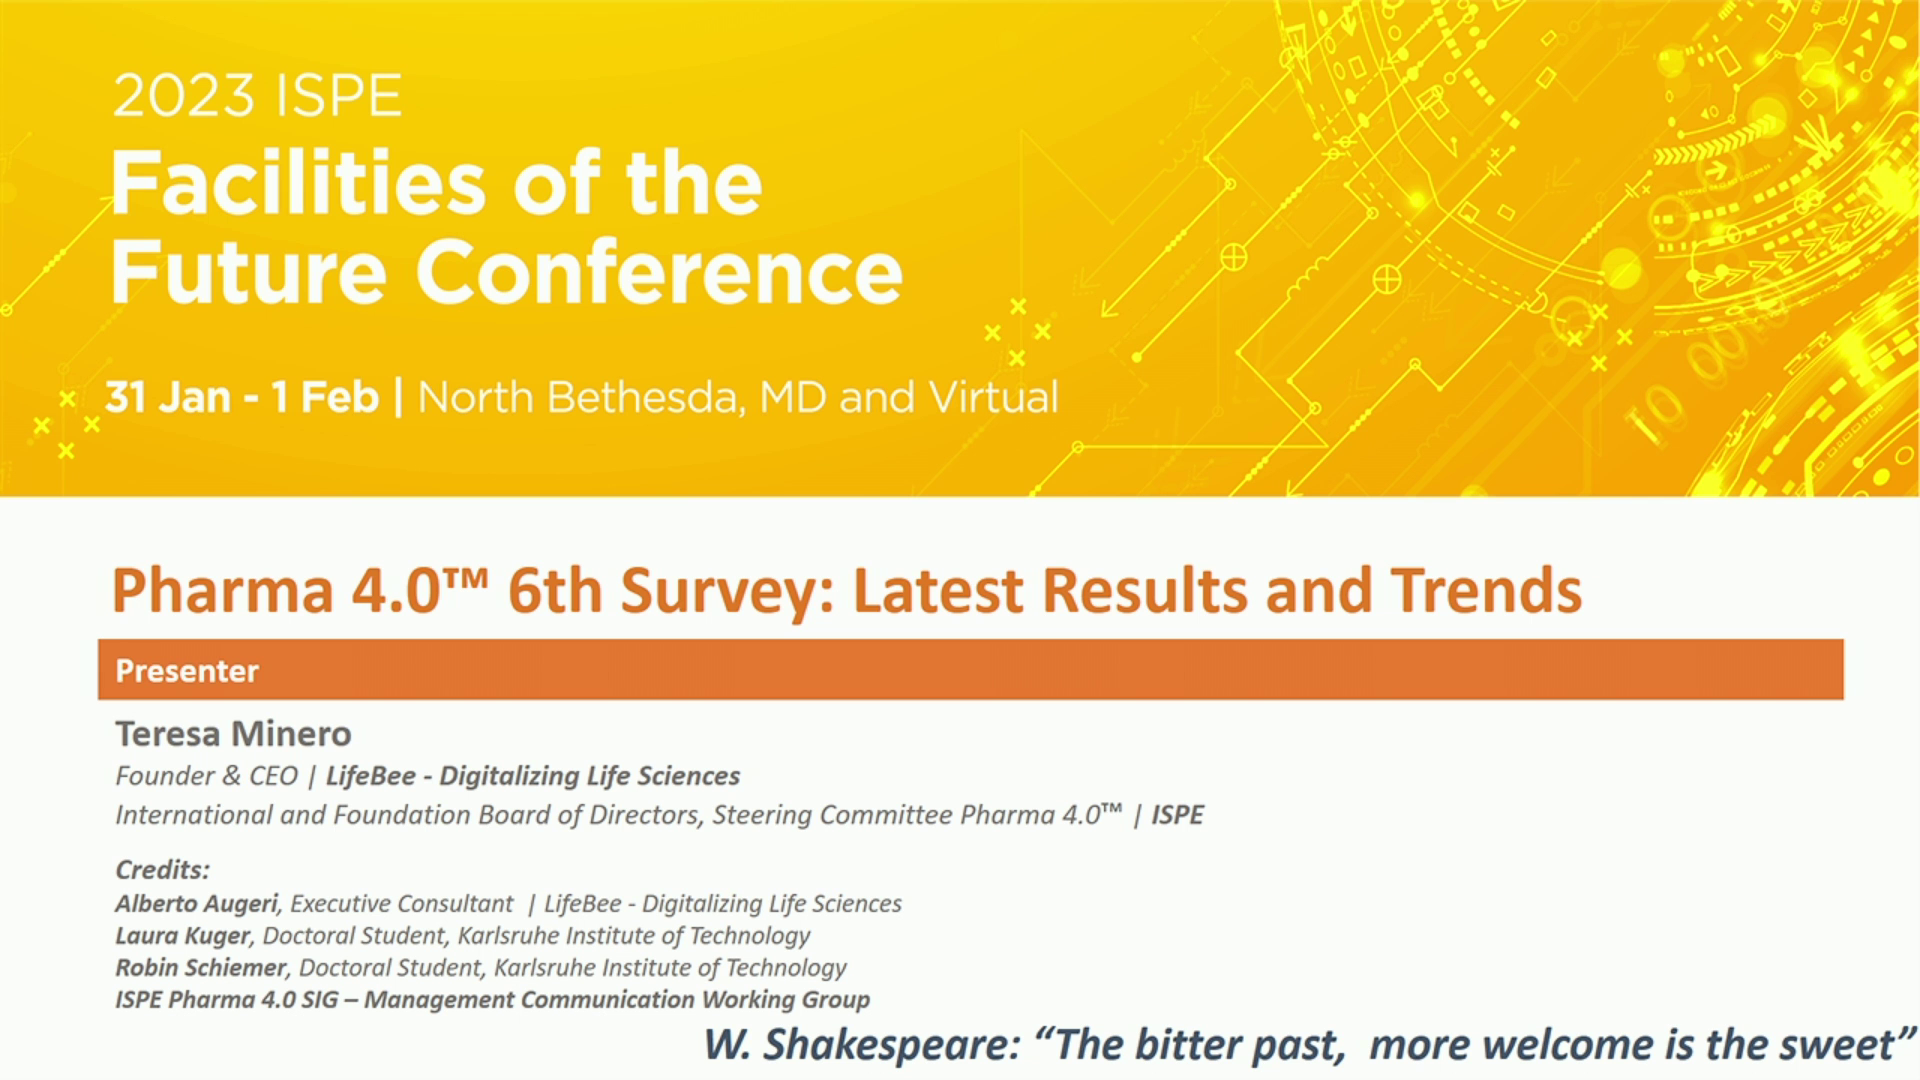 Pharma 4.0 6th Survey - Latest Results and Trends icon